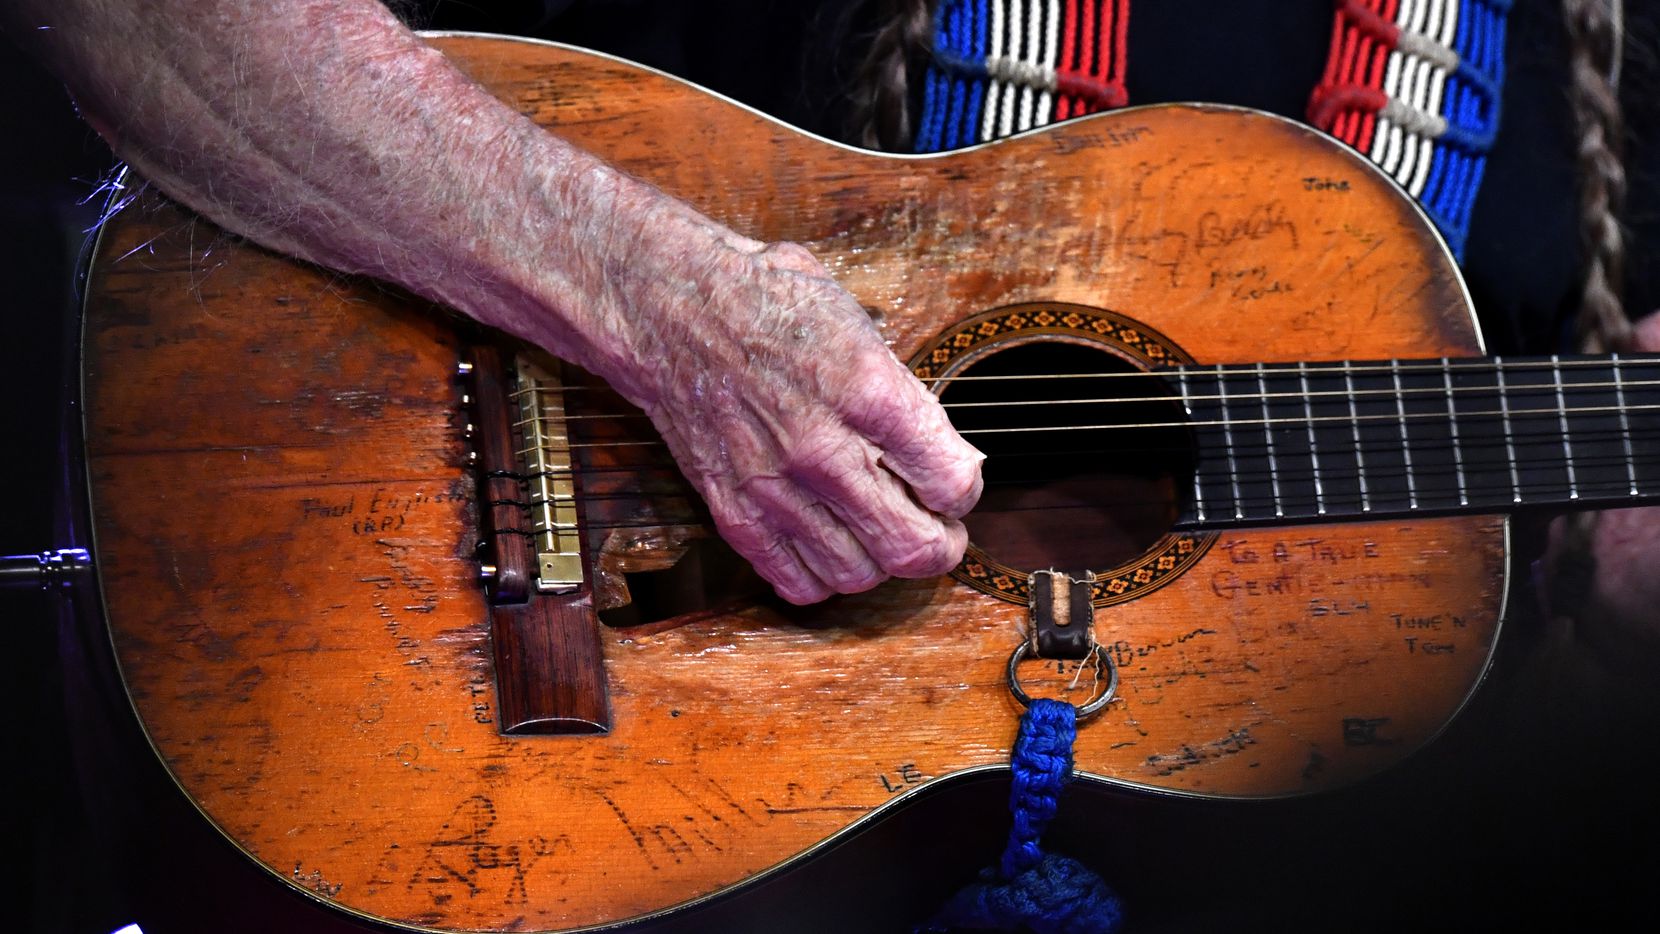 Willie Nelson strums his well-worn guitar, Trigger, during his set at the Outlaws & Legends...